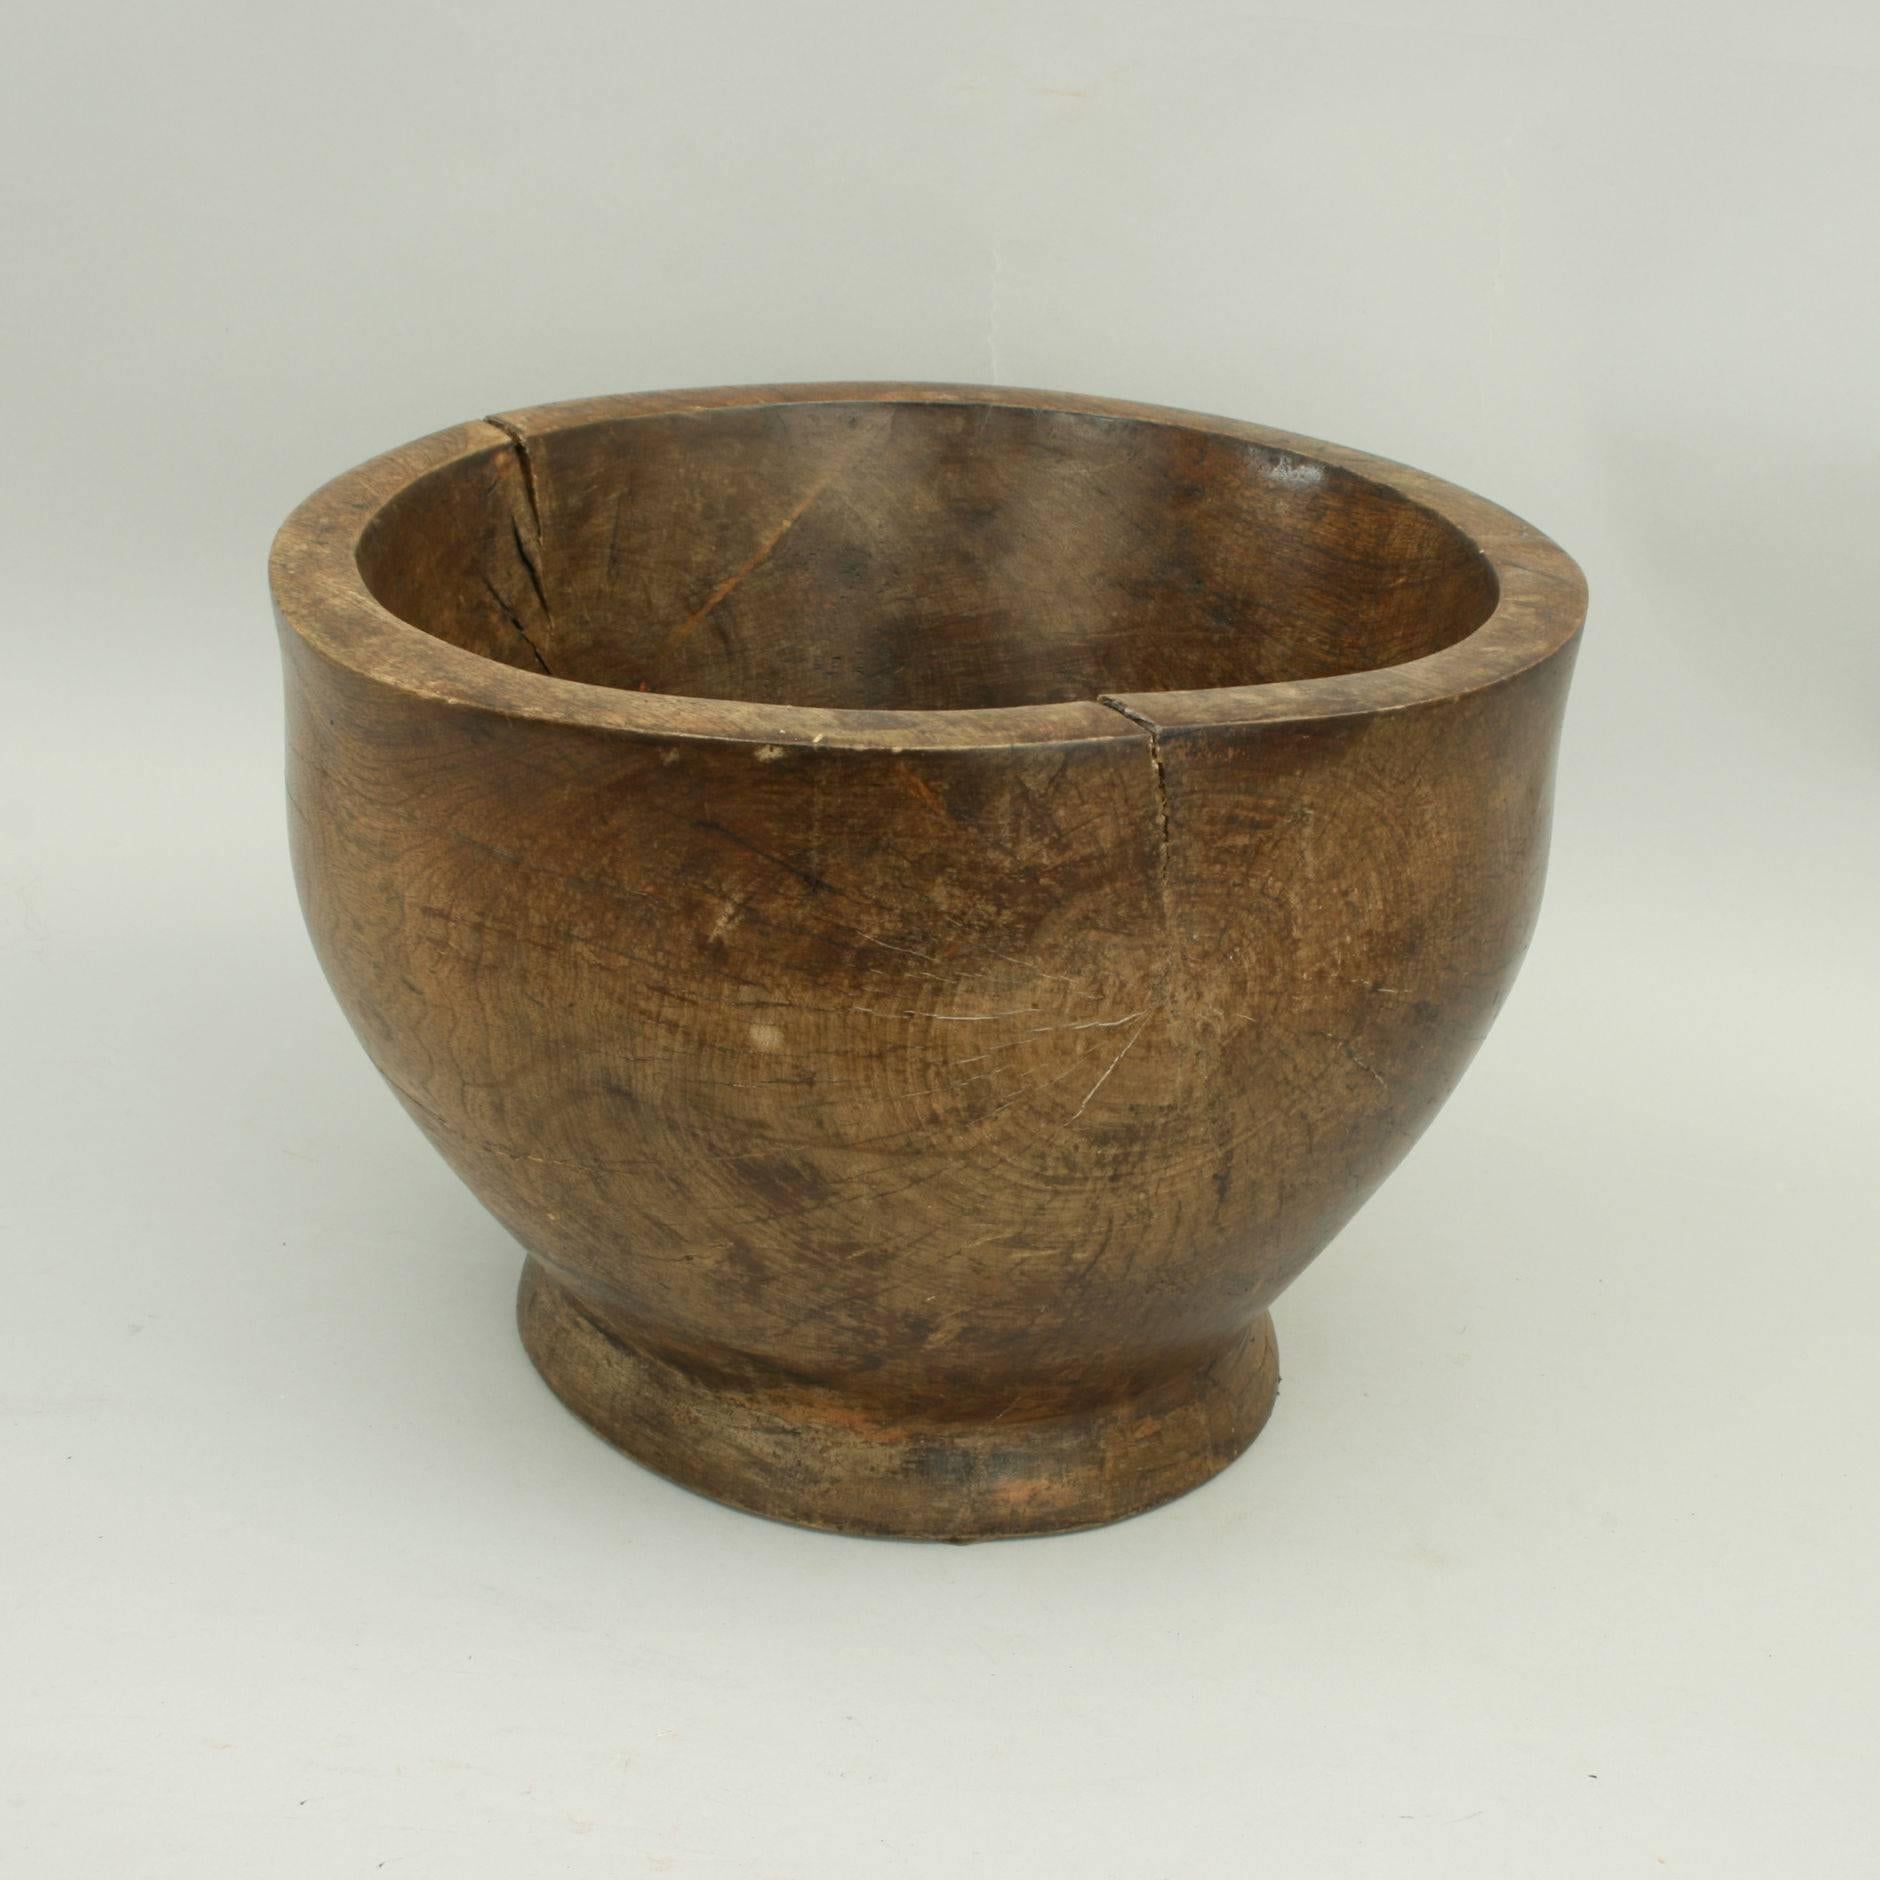 A good size bowl, probably turned from walnut or teak. The bowl is very solid with thick walls and wonderful grain and very nice patina.